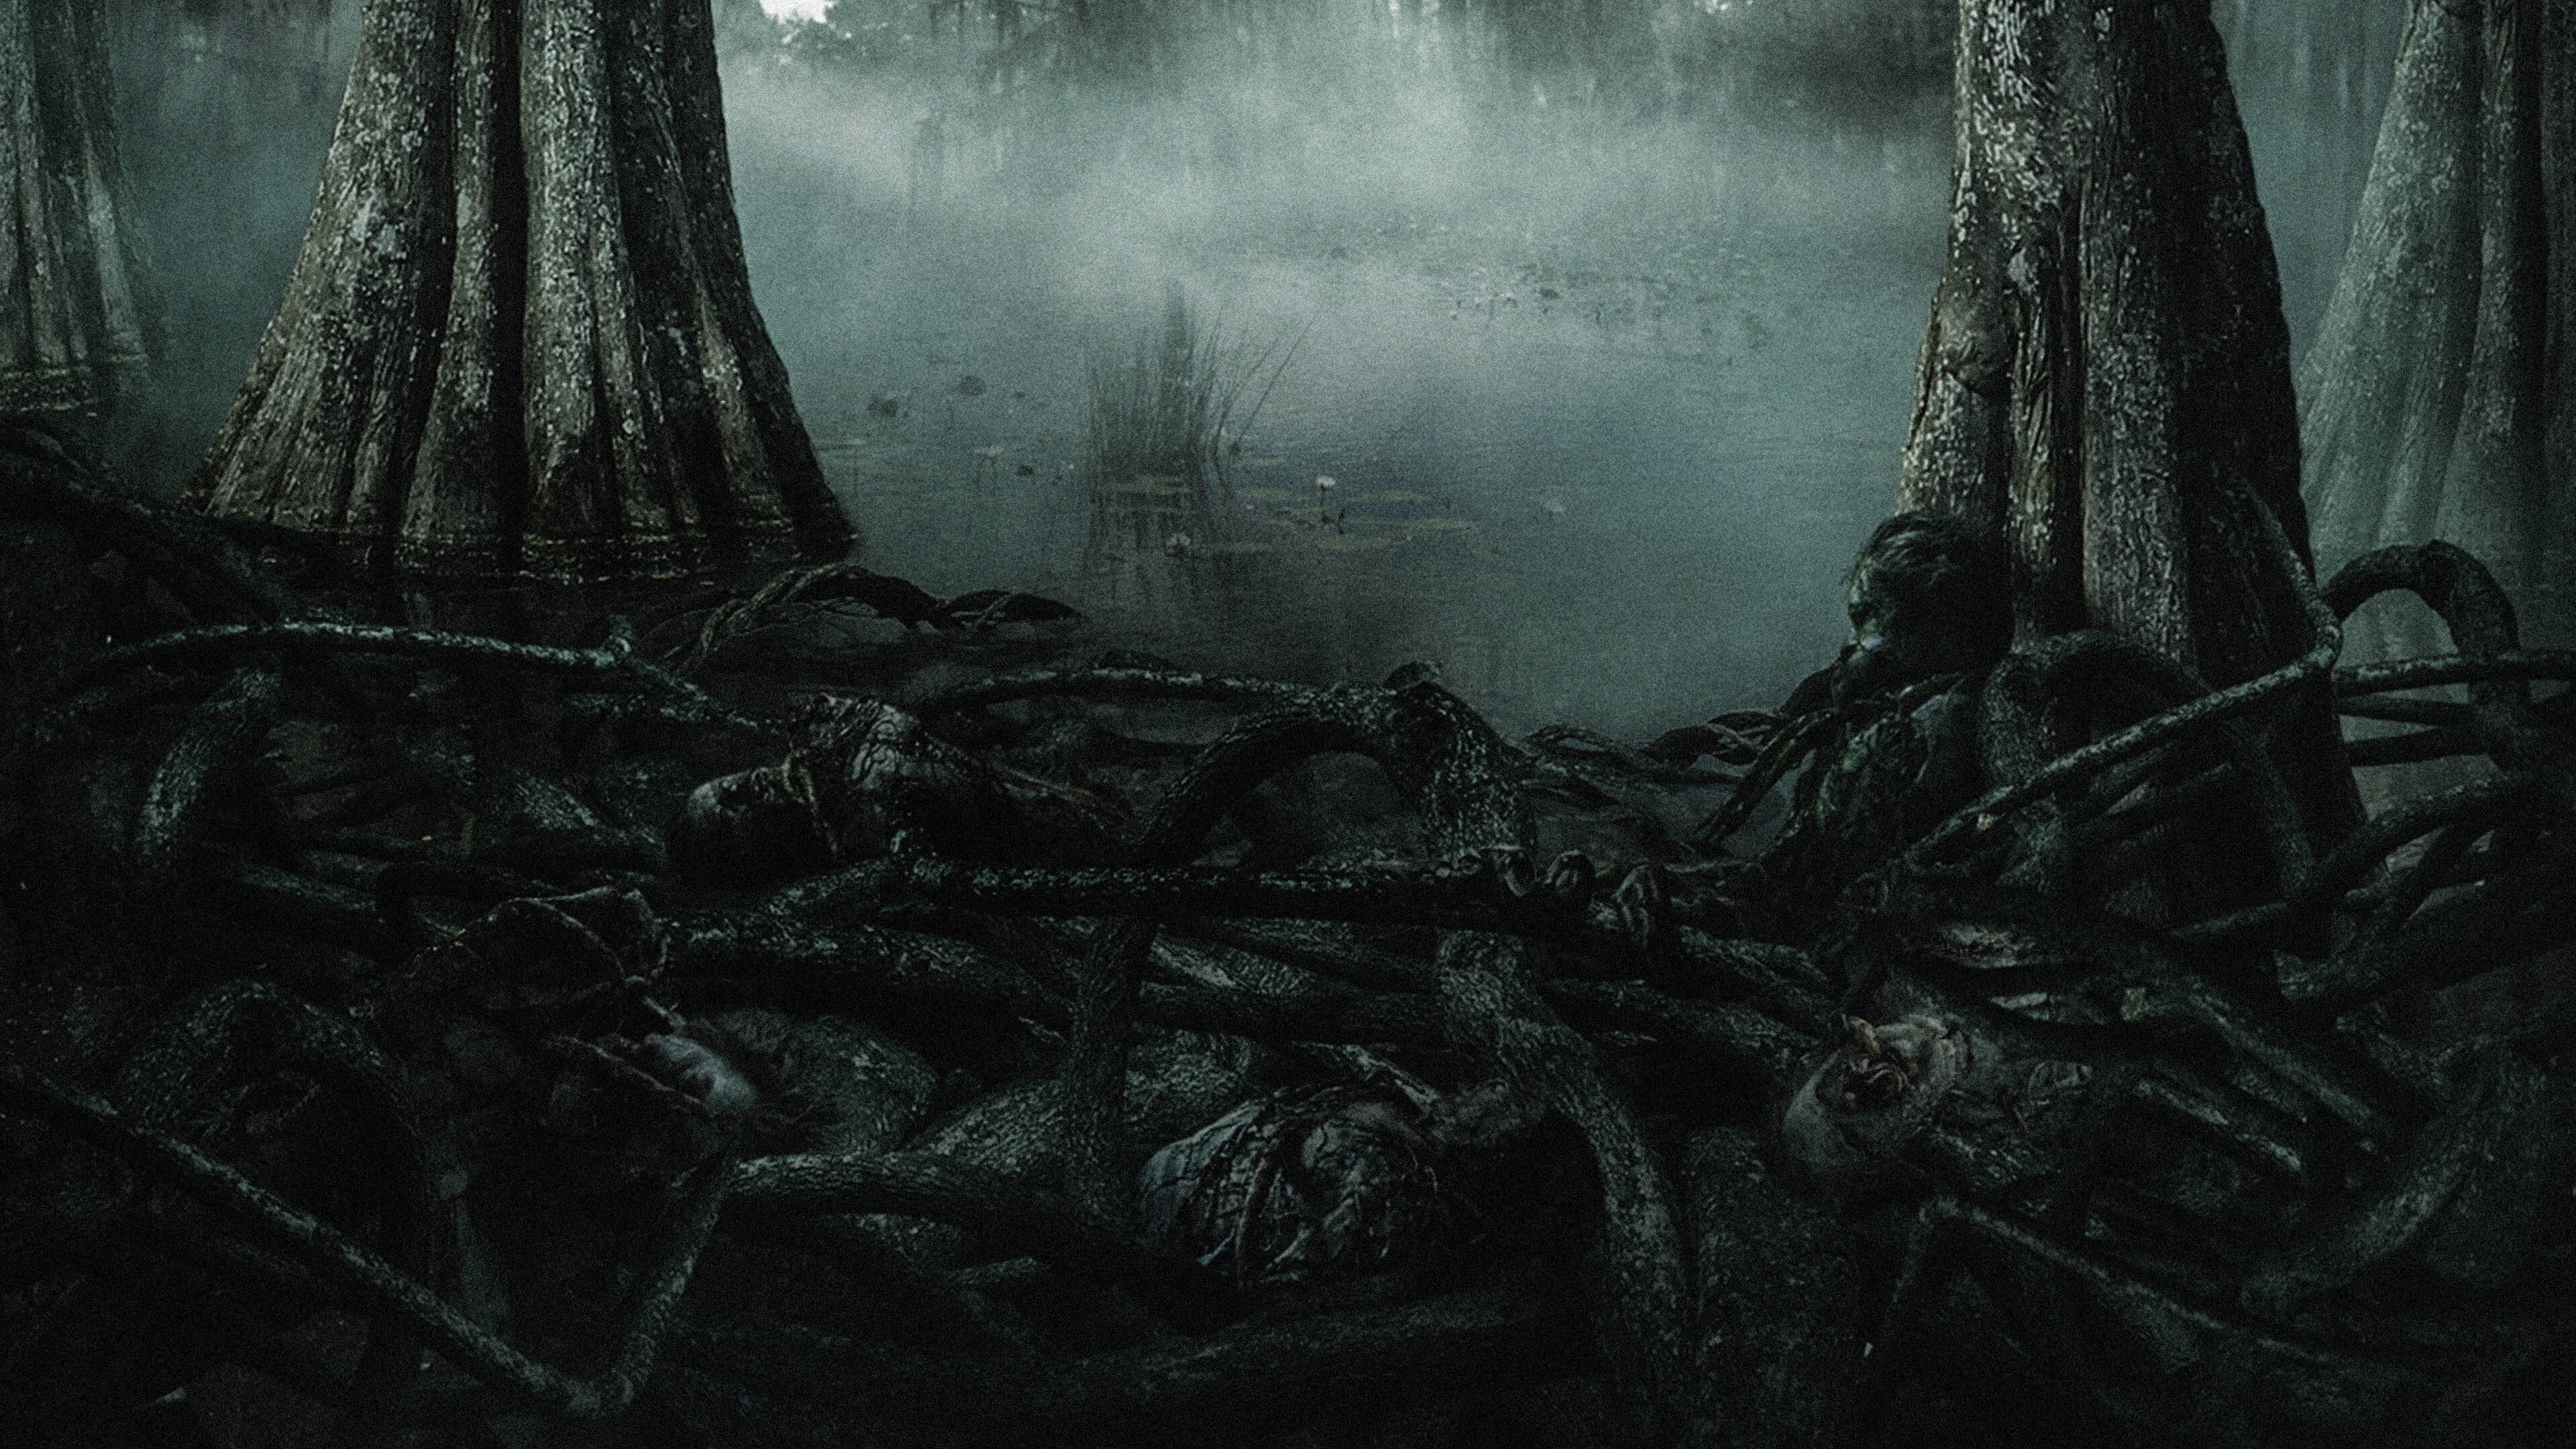 Swamp Thing Picture - Image Abyss.